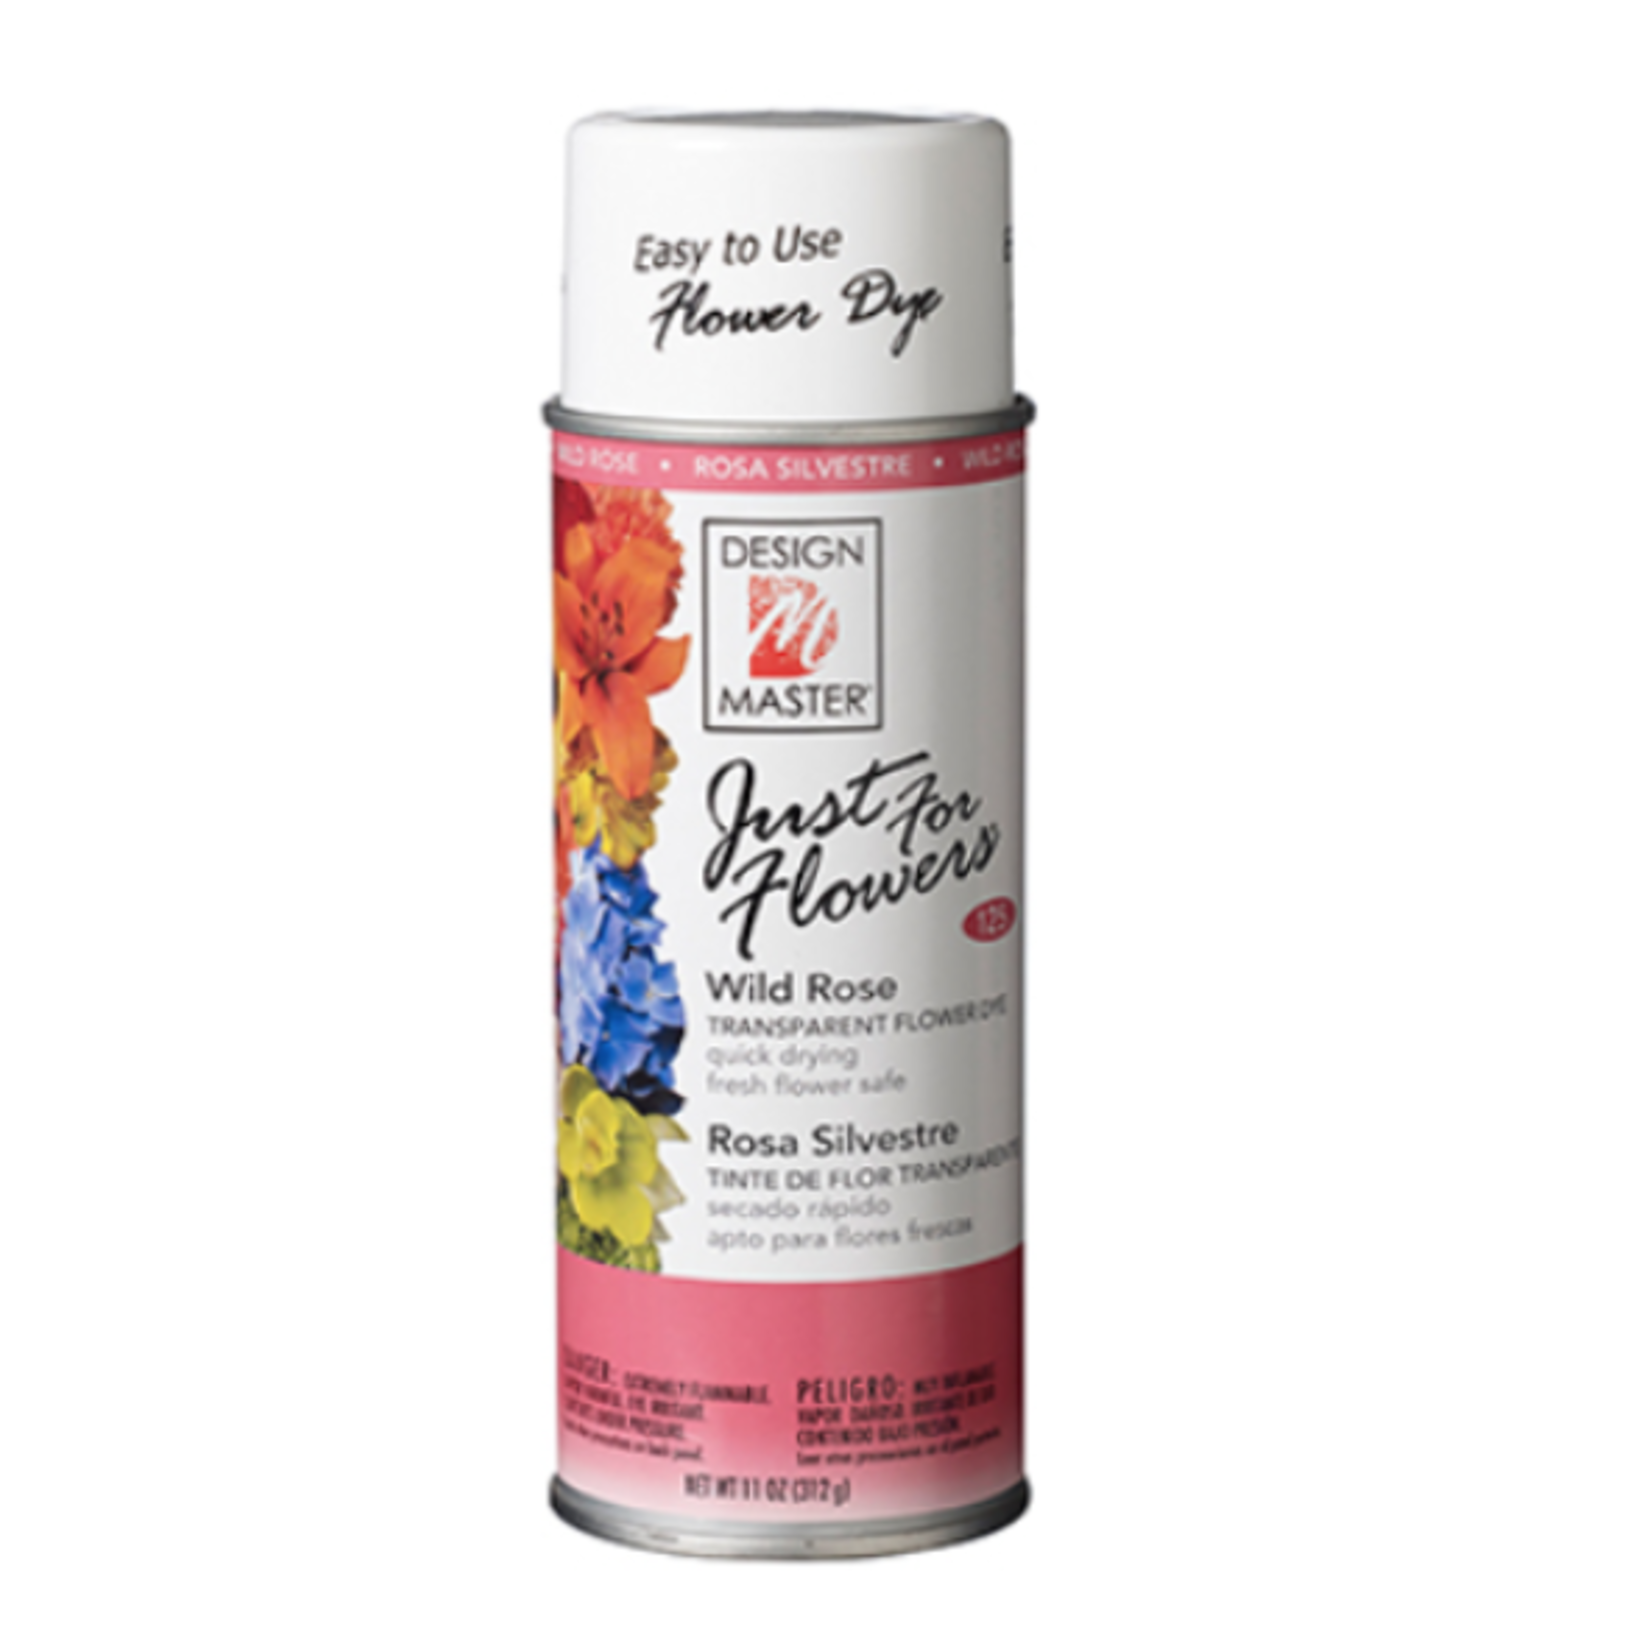 40% off was $14 now $8.39. 125 Just For Flowers wild rose